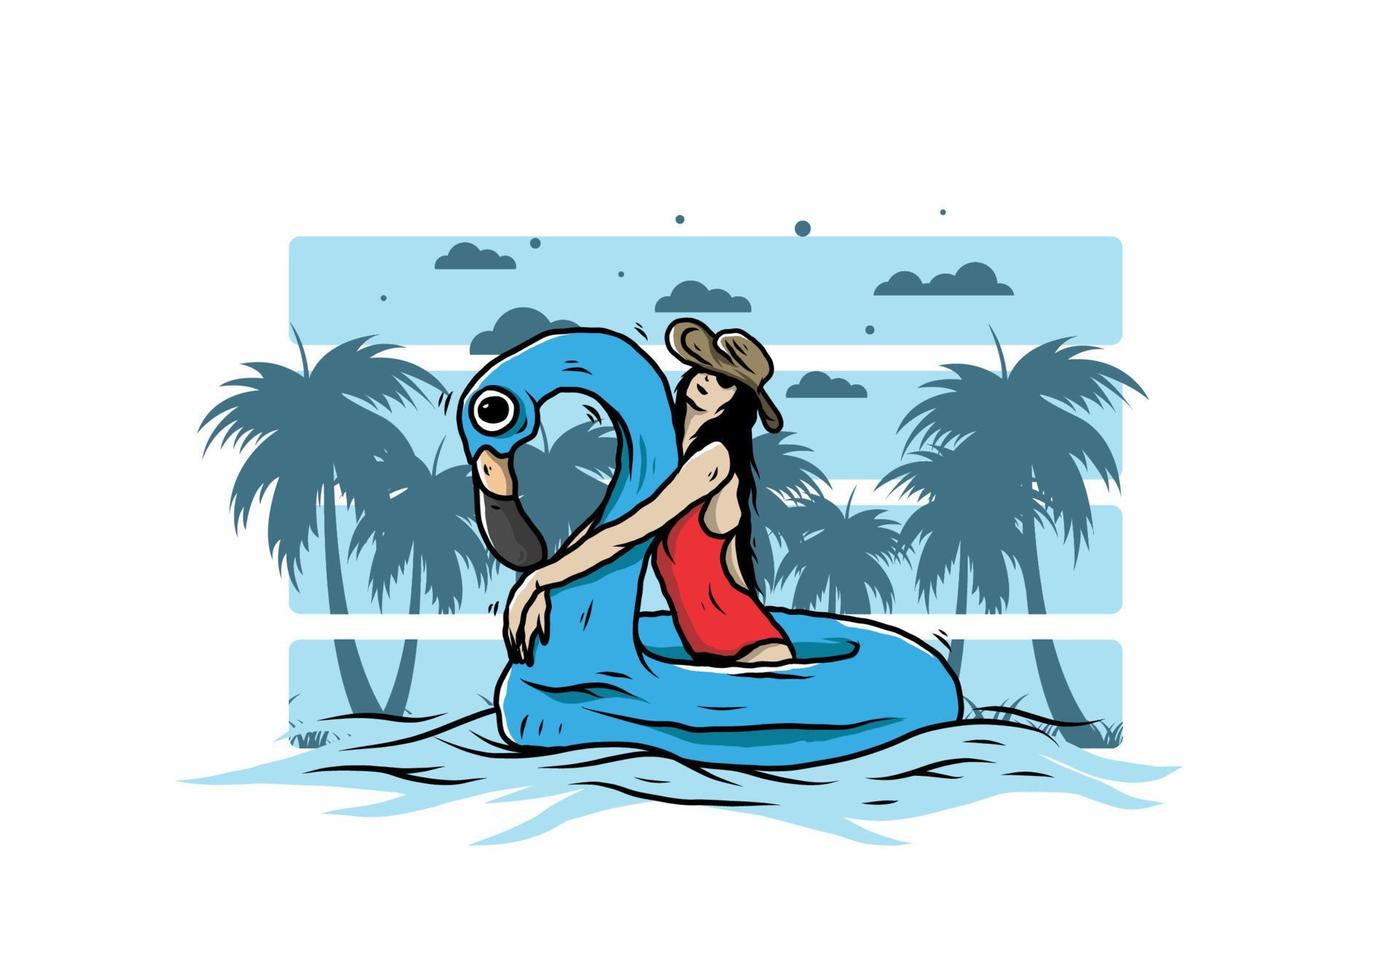 Girl wearing beach hat in an inflatable lifebuoy Flamingo illustration vector